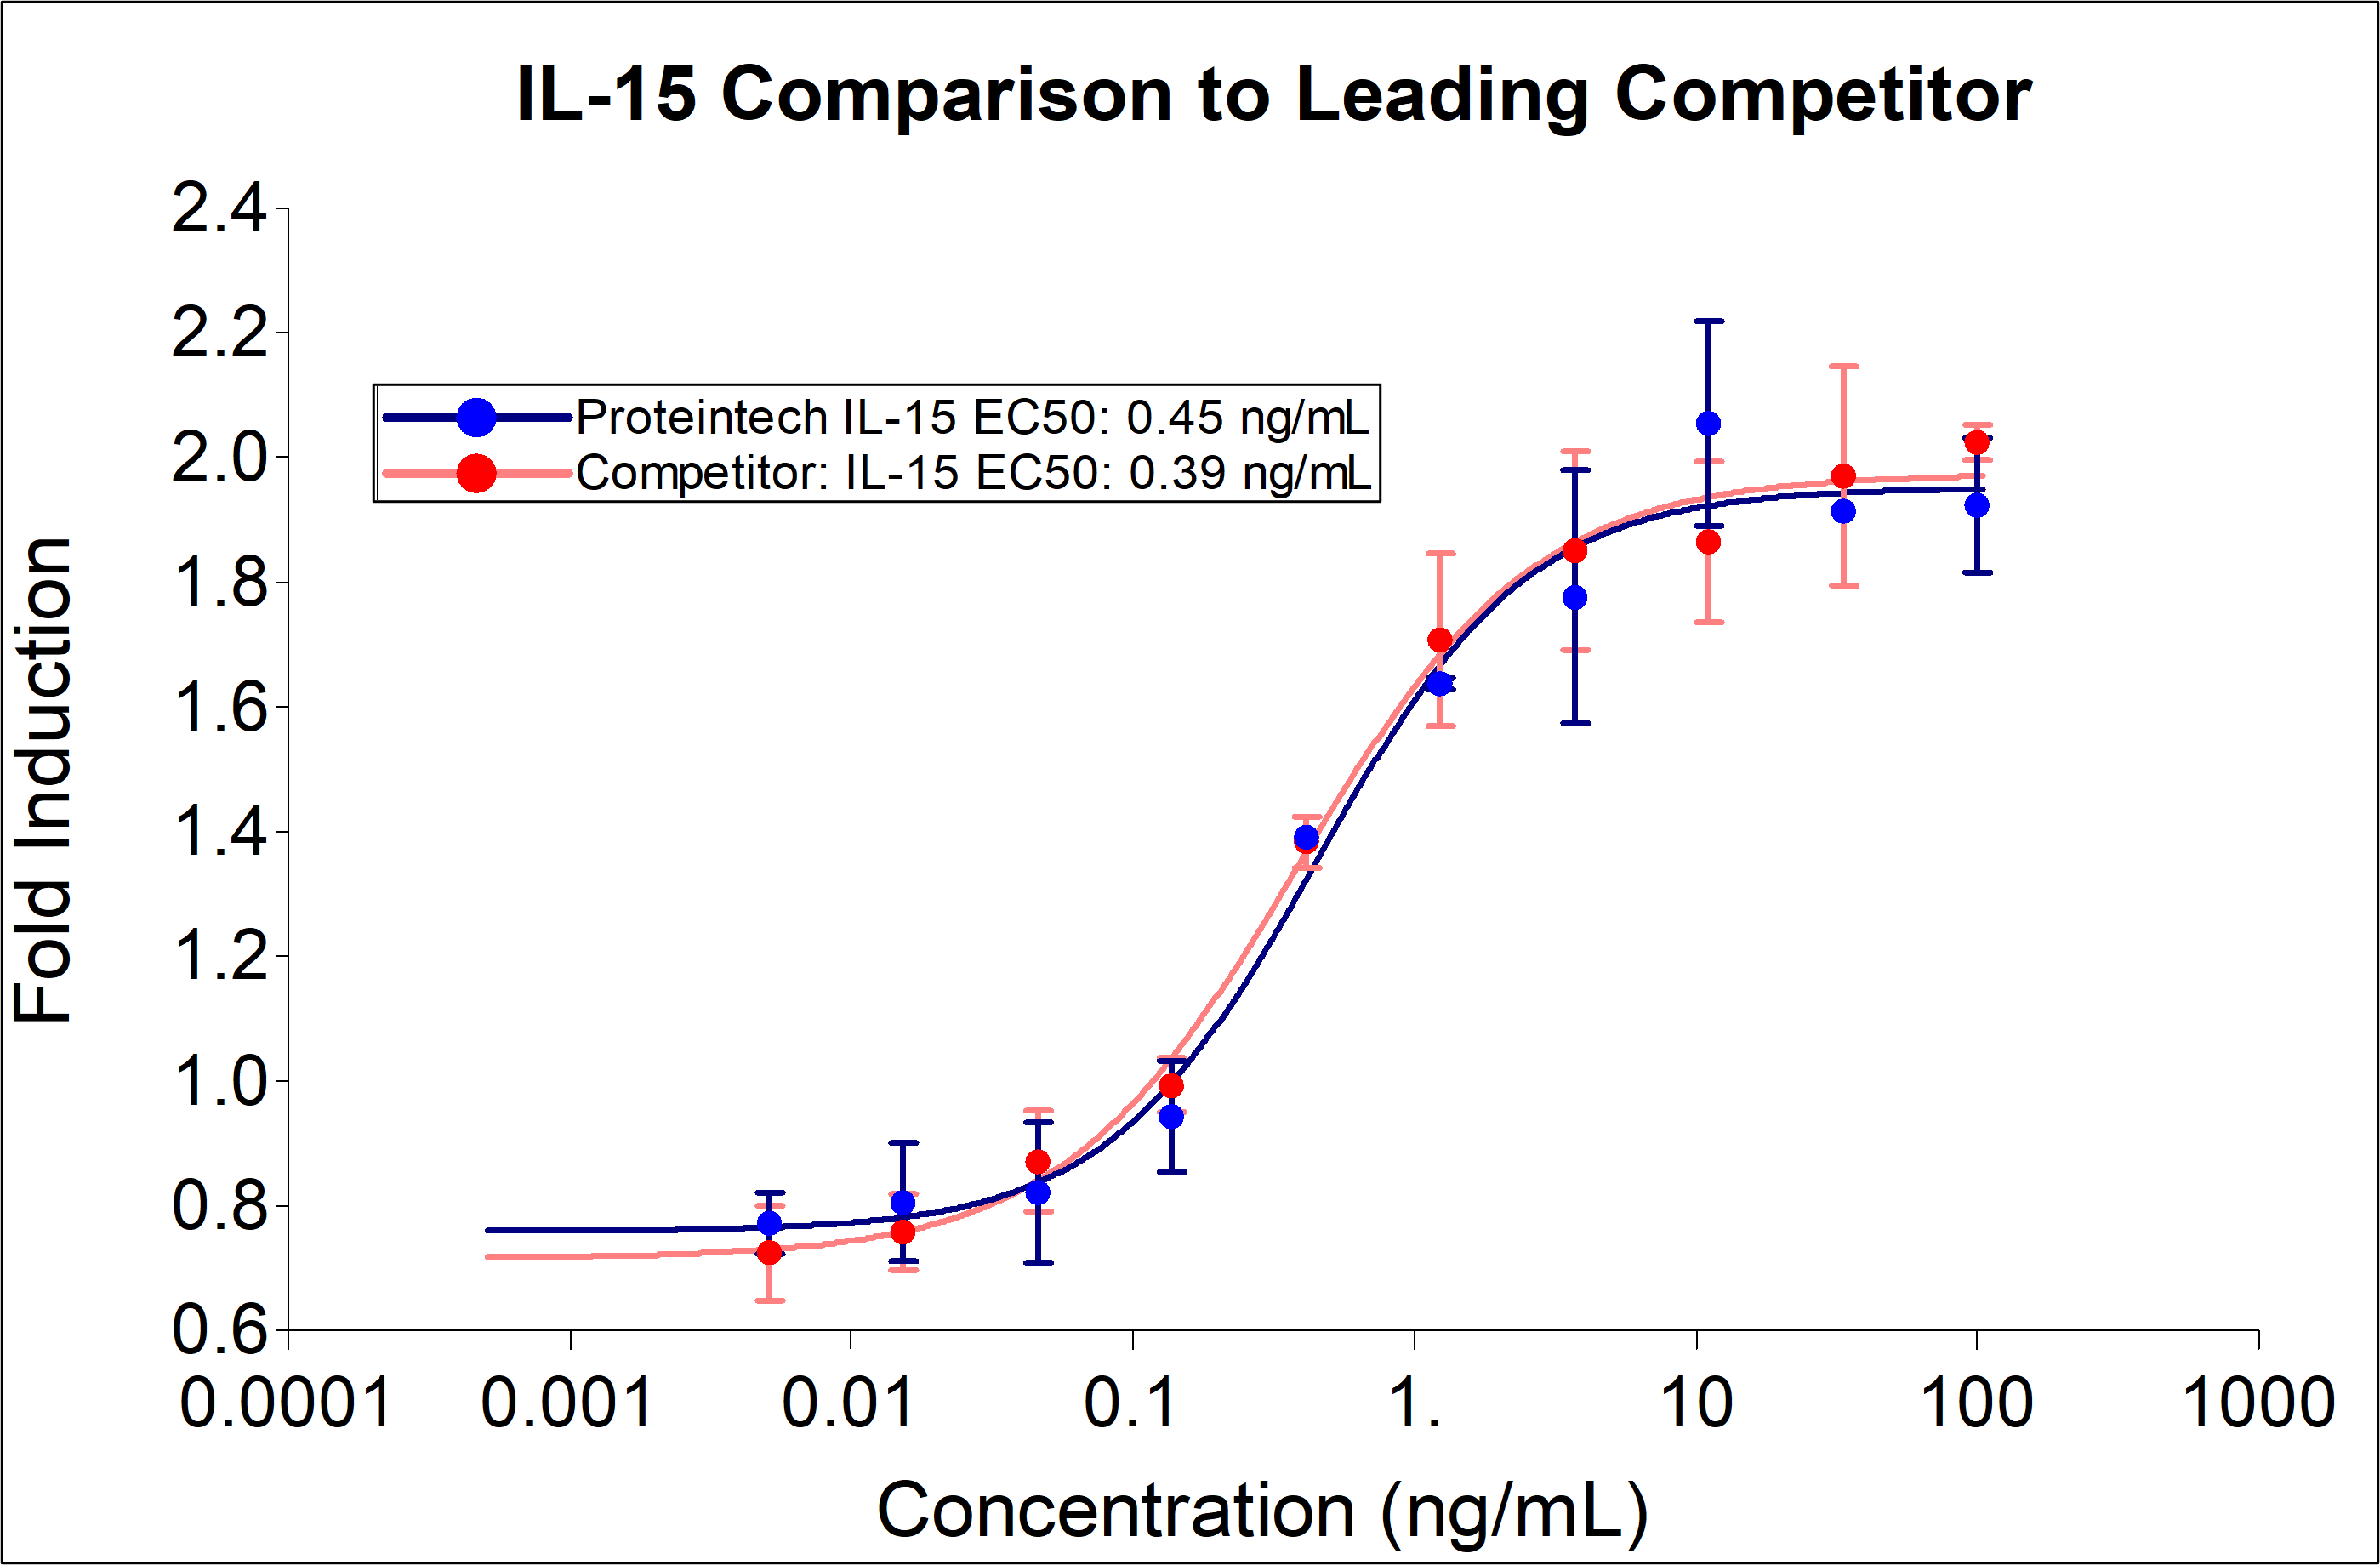 Proteintech IL-15 demonstrates equivalent induction of proliferation and EC50 compared to leading competitors. Recombinant human IL-15 stimulates dose-dependent proliferation of the NK-92 human natural killer cell line. Cell number was quantitatively assessed by PrestoBlue® Cell Viability Reagent. NK-92 cells were treated with increasing concentrations of recombinant IL-15 for 72 hours. The EC50 was determined using a 4-parameter non-linear regression model. The EC50 range is 0.07-0.37 ng/mL.